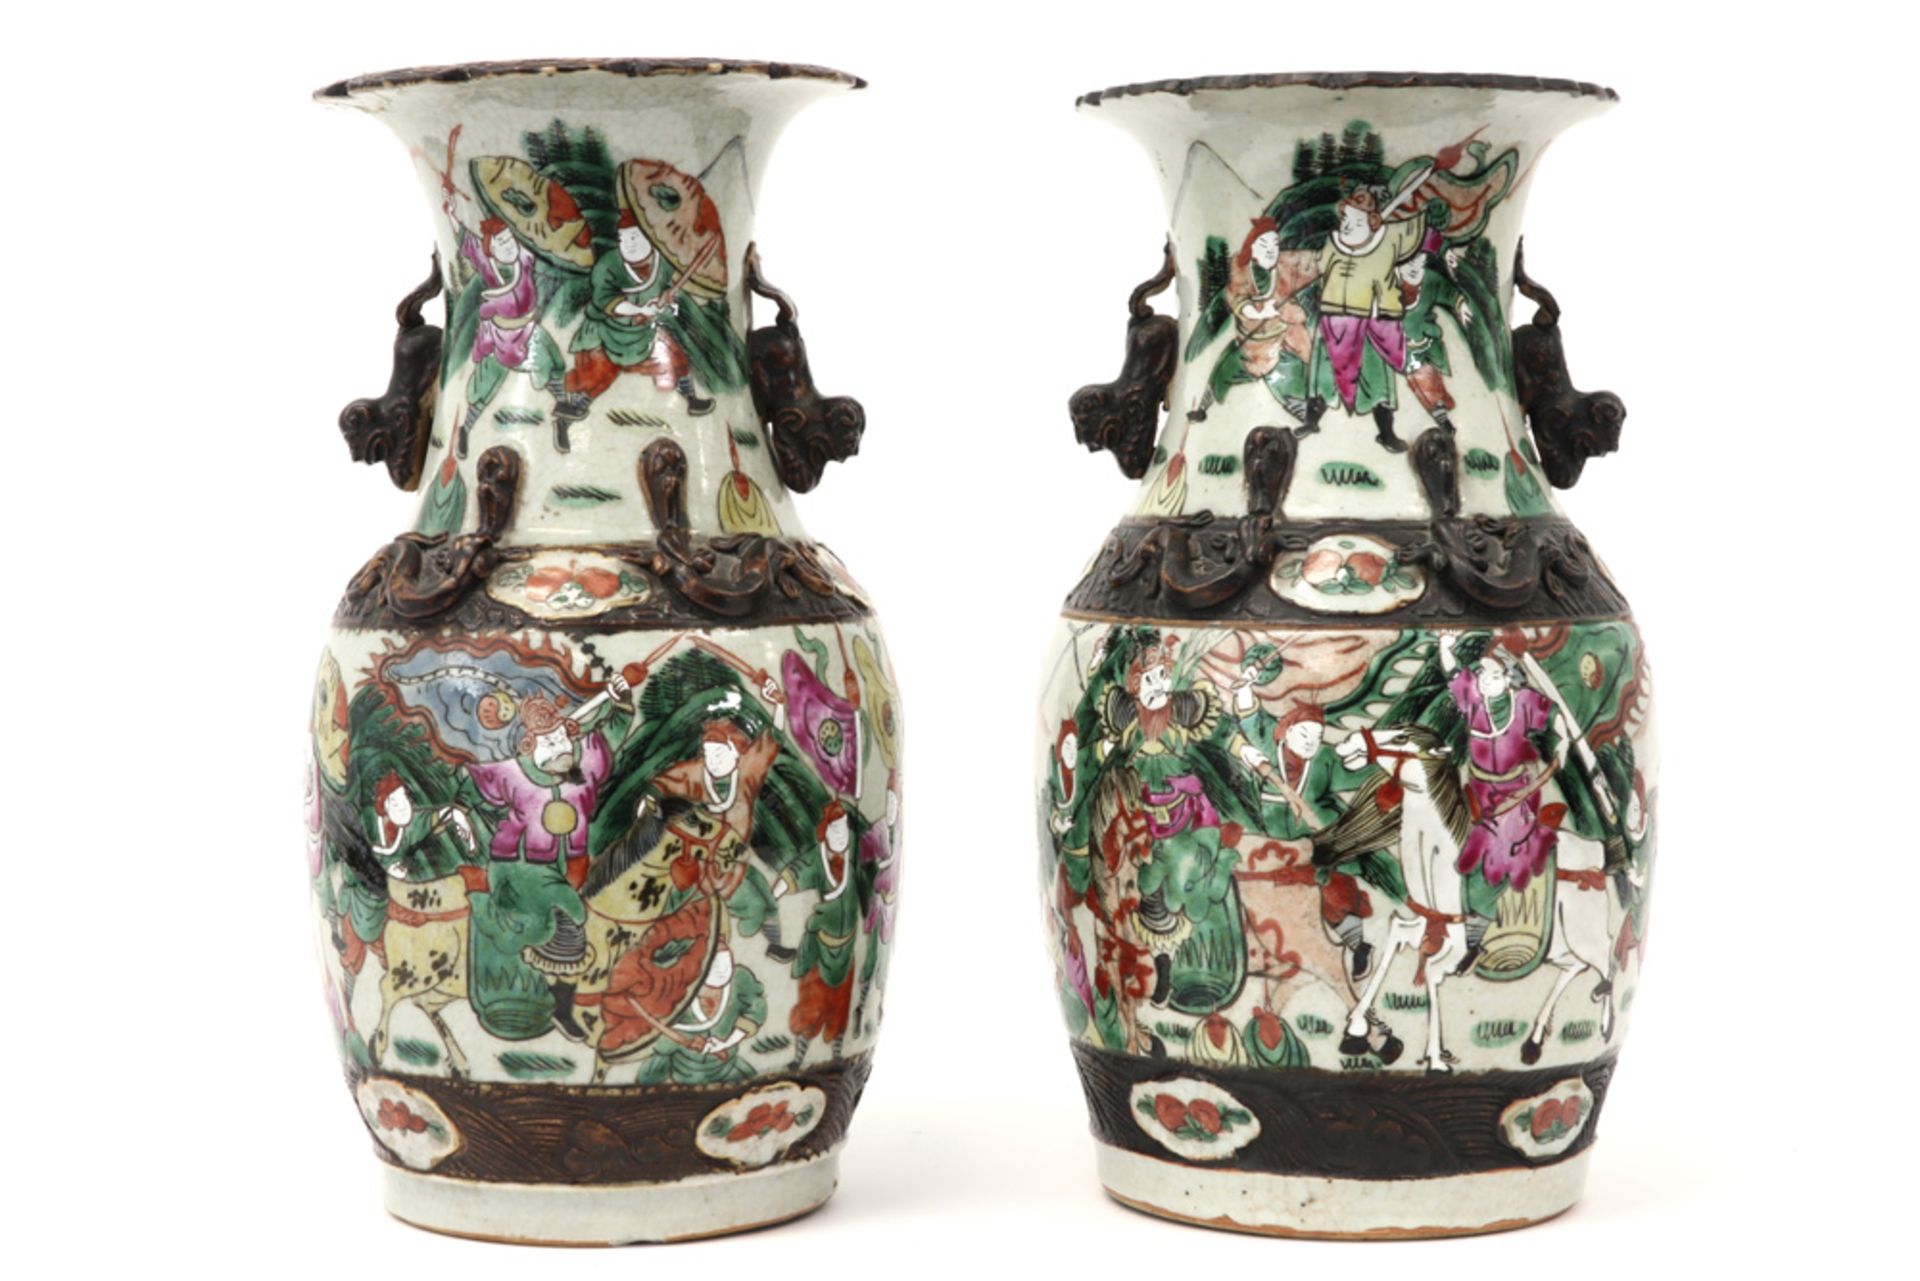 pair of antique Chinese "Nankin" vases in marked porcelain with a typical polychrome warriors' decor